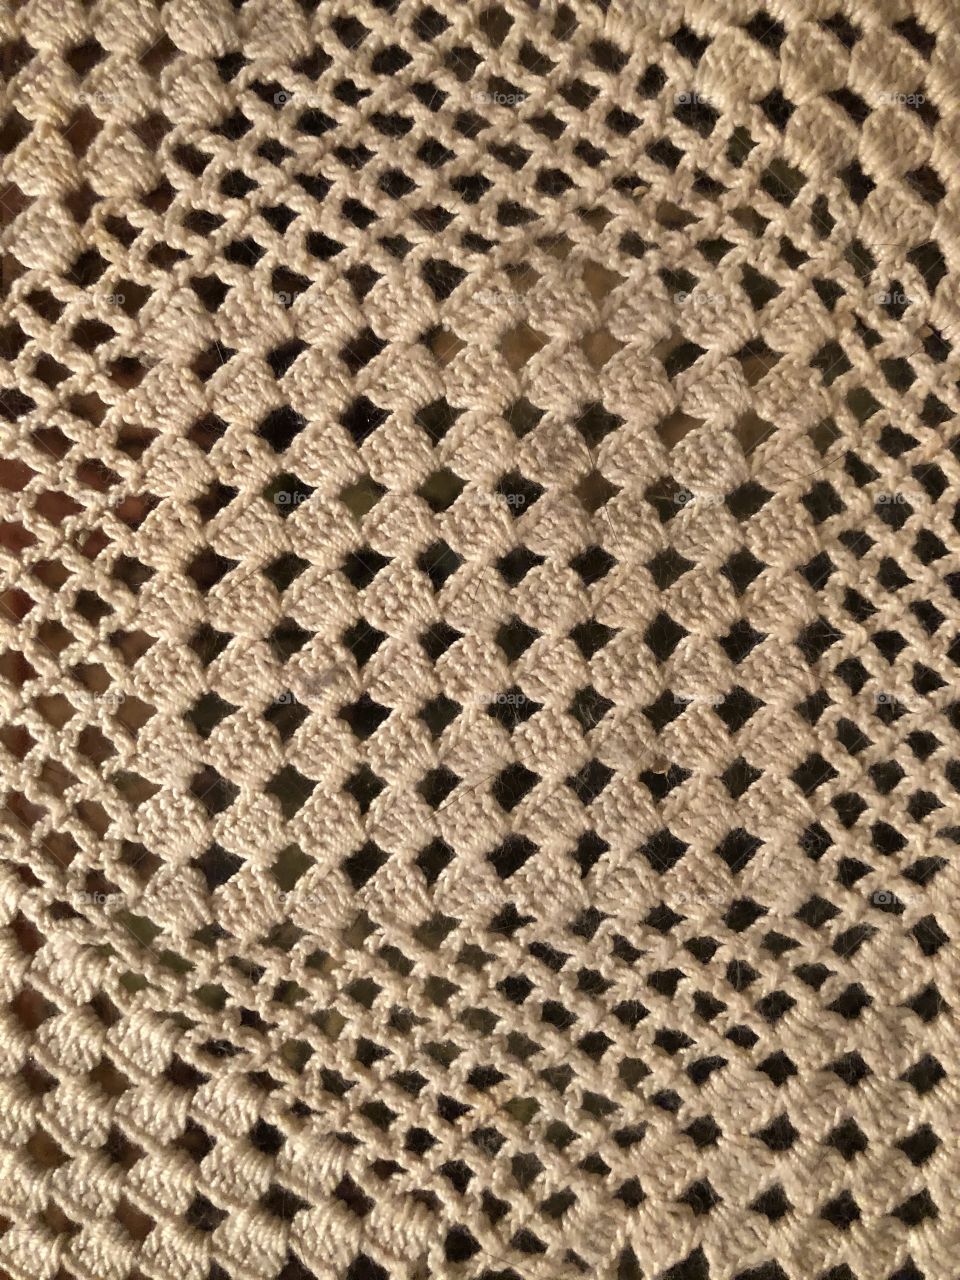 Symmetry found in old art of crocheting appealing to sense of vintage beauty